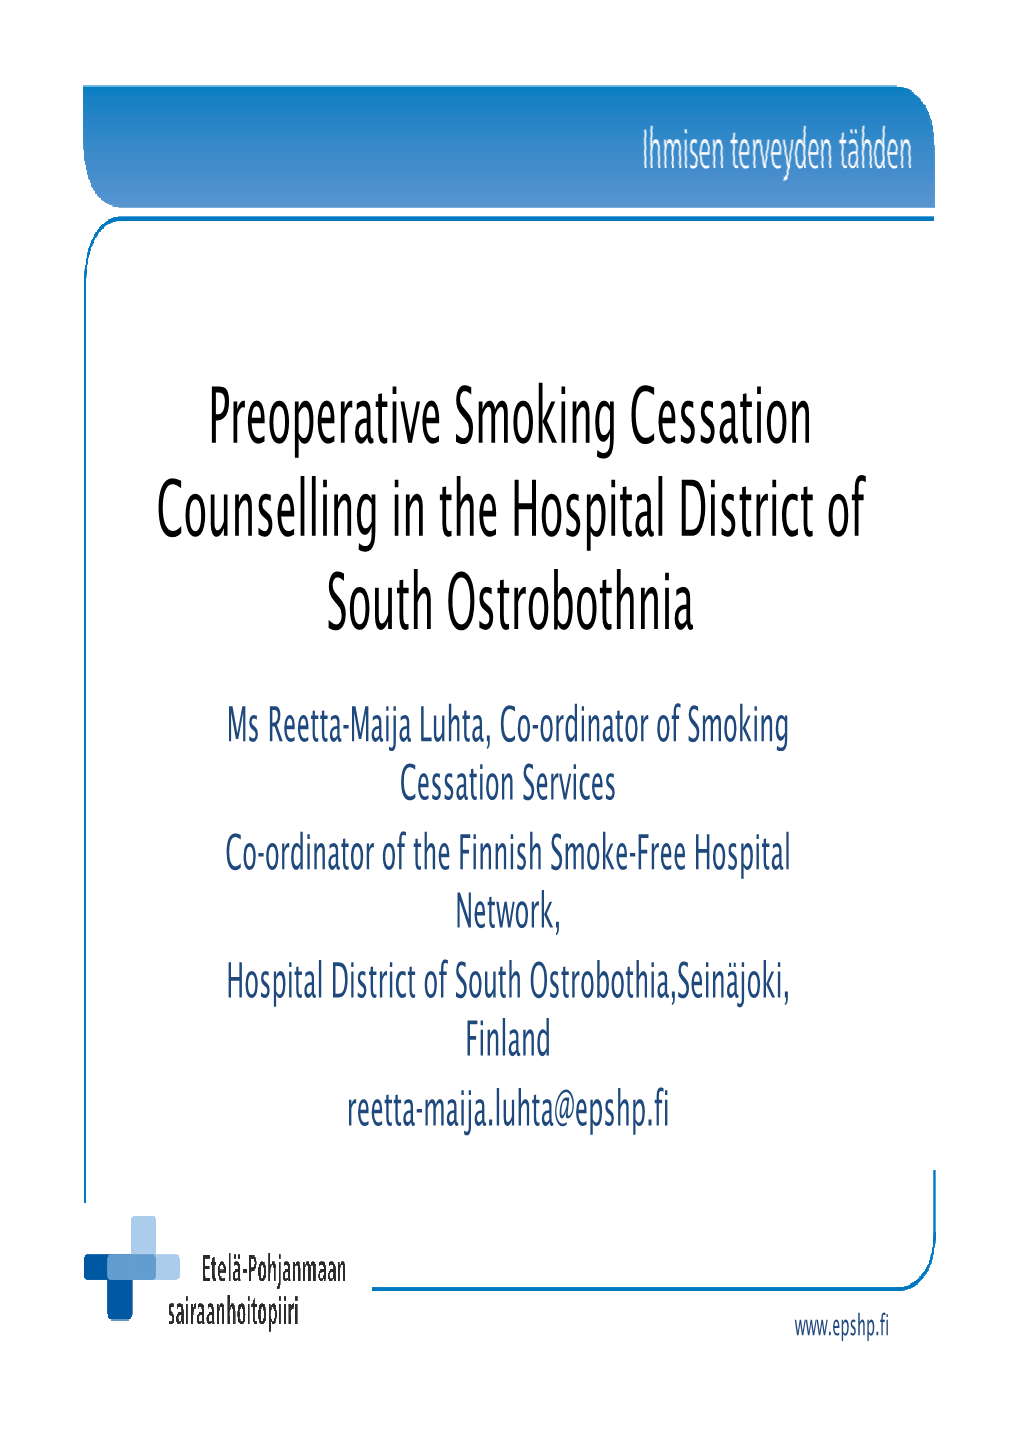 Preoperative Smoking Cessation Counselling in the Hospital District of South Ostrobothnia